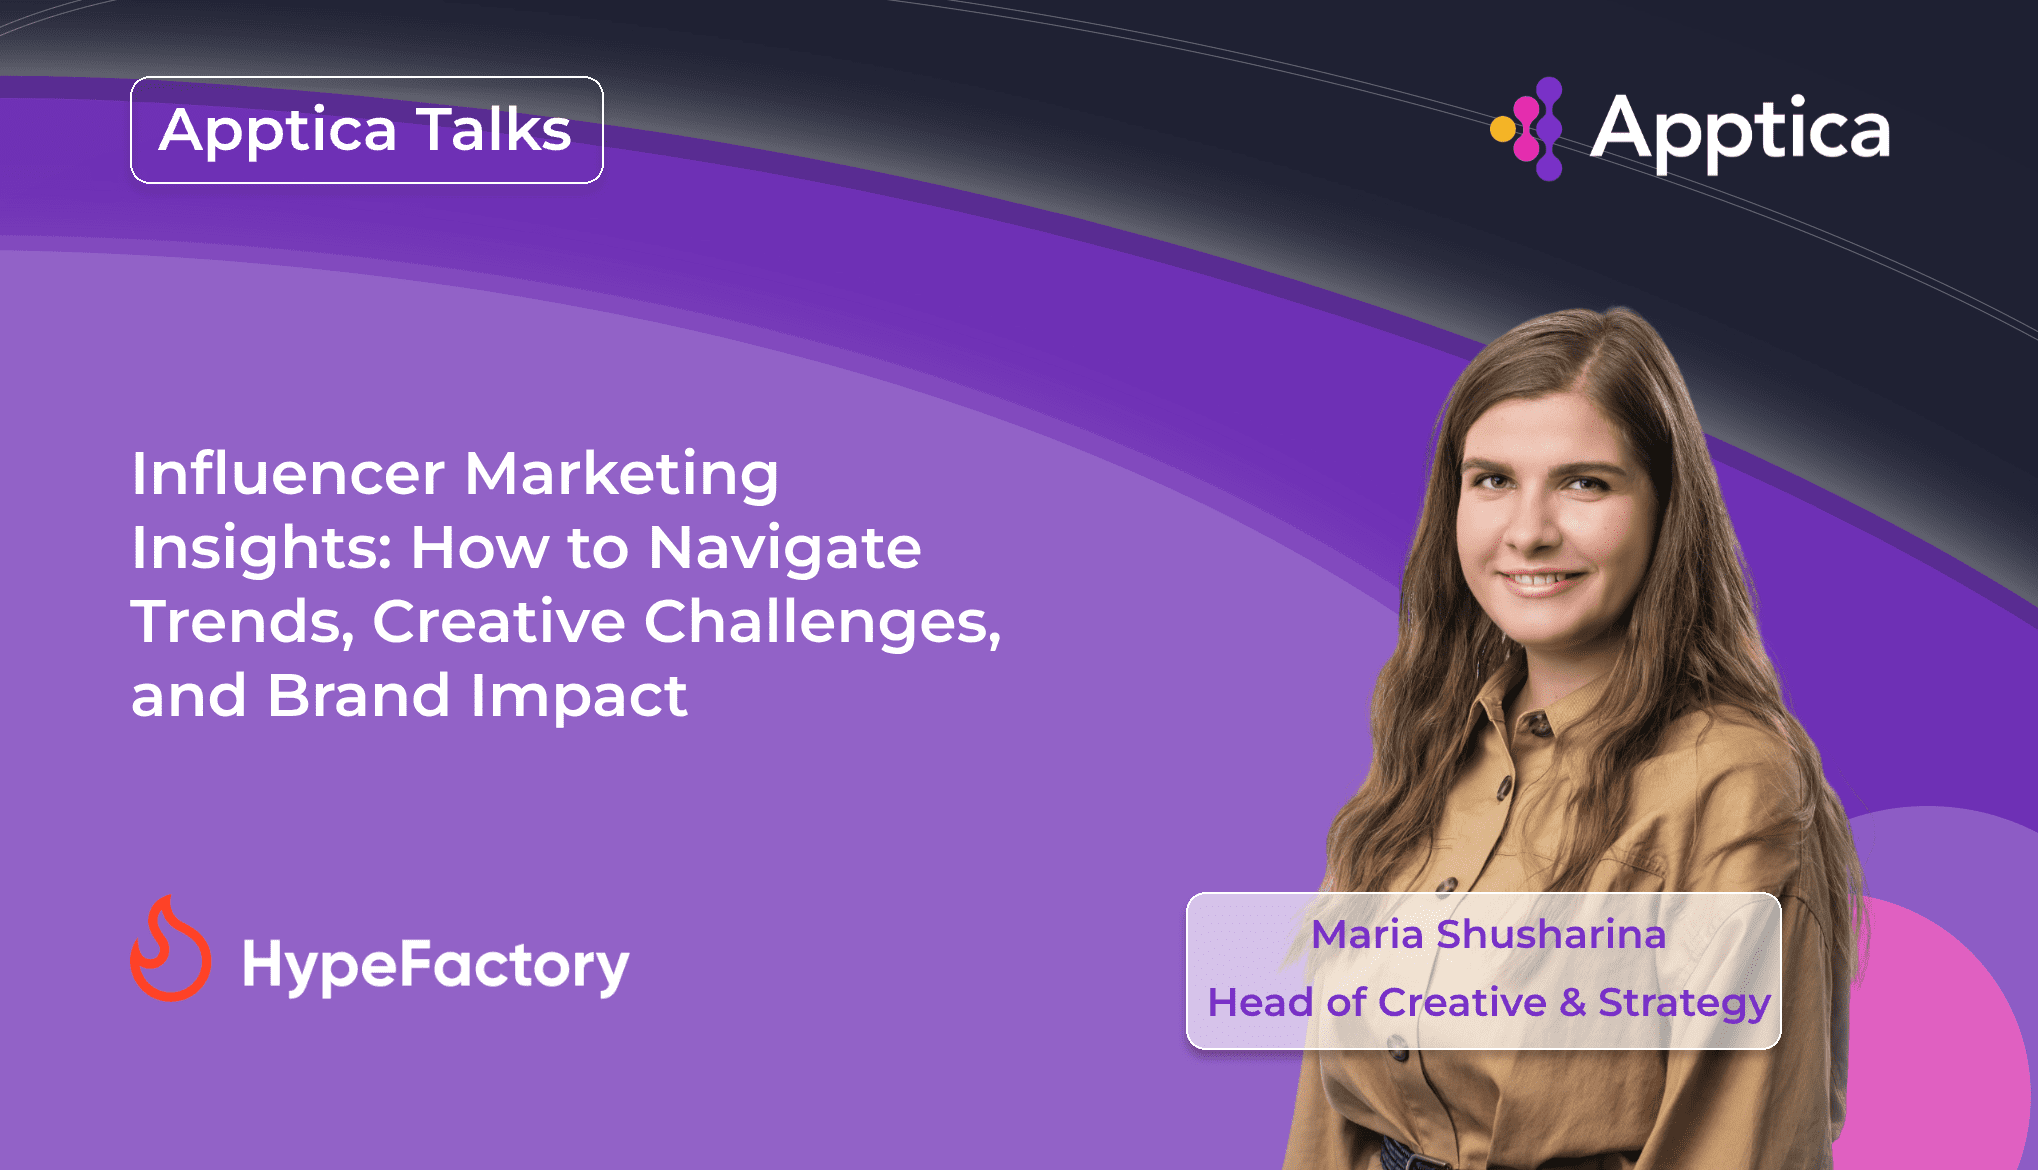 Apptica Talks. Episode #6. Influencer Marketing Insights: How to Navigate Trends, Creative Challenges, and Brand Impact with Maria Shusharina, Head of Creative&Strategy at HypeFactory